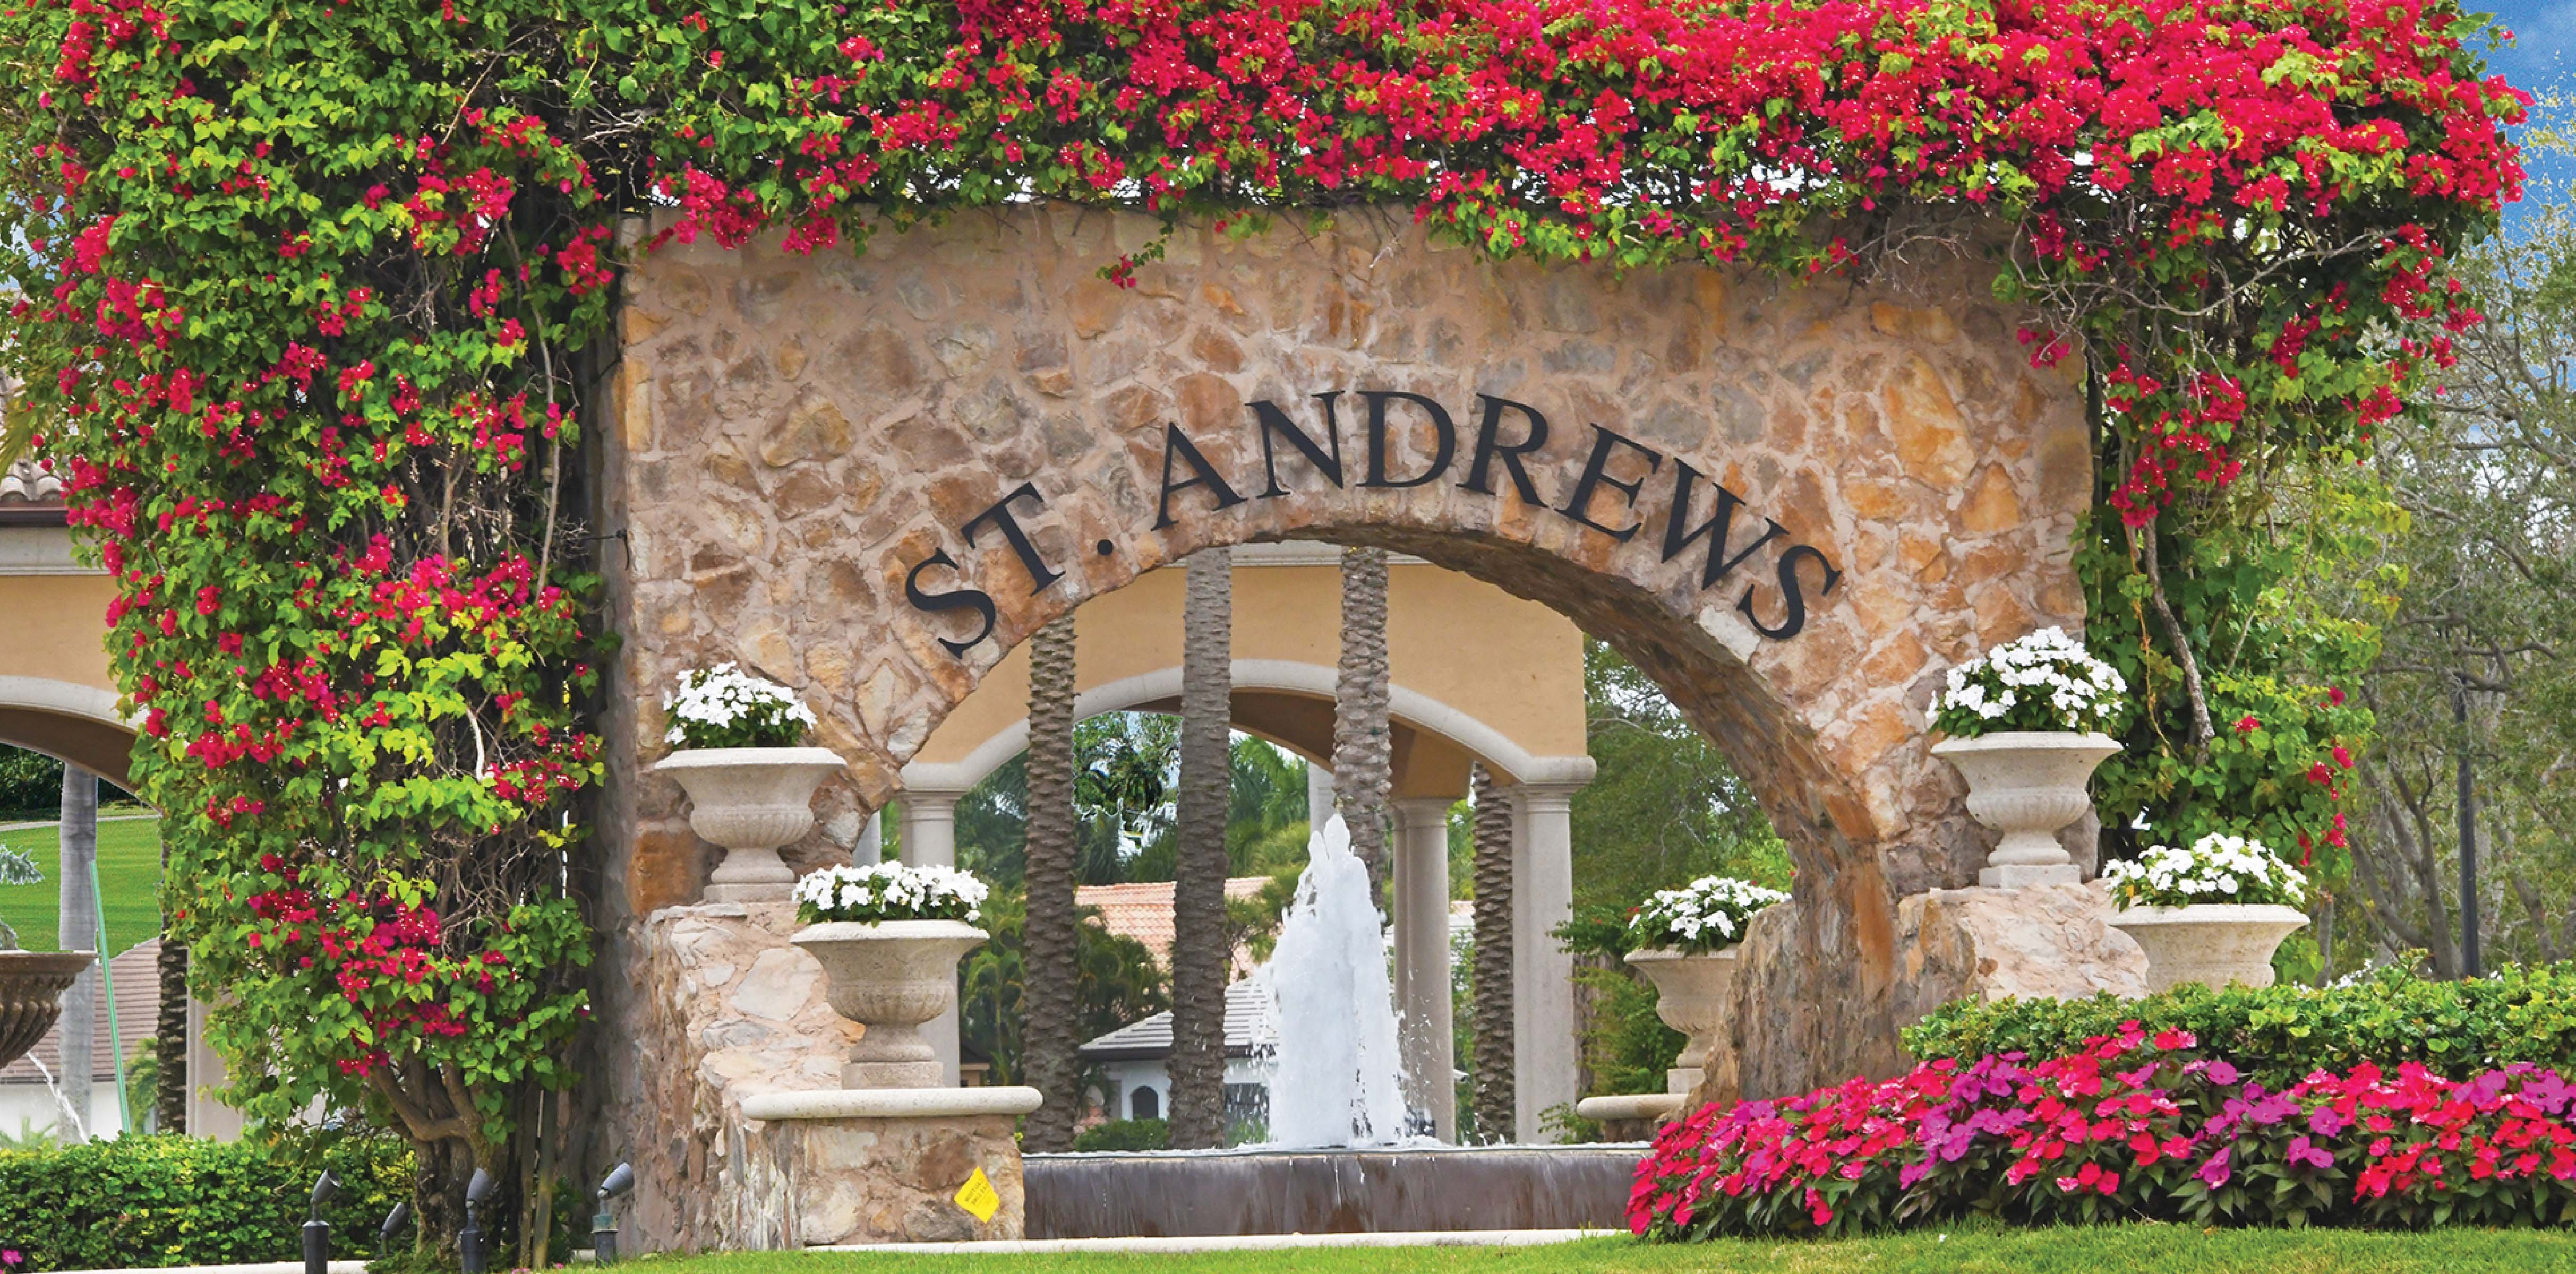 St Andrews country club entrance